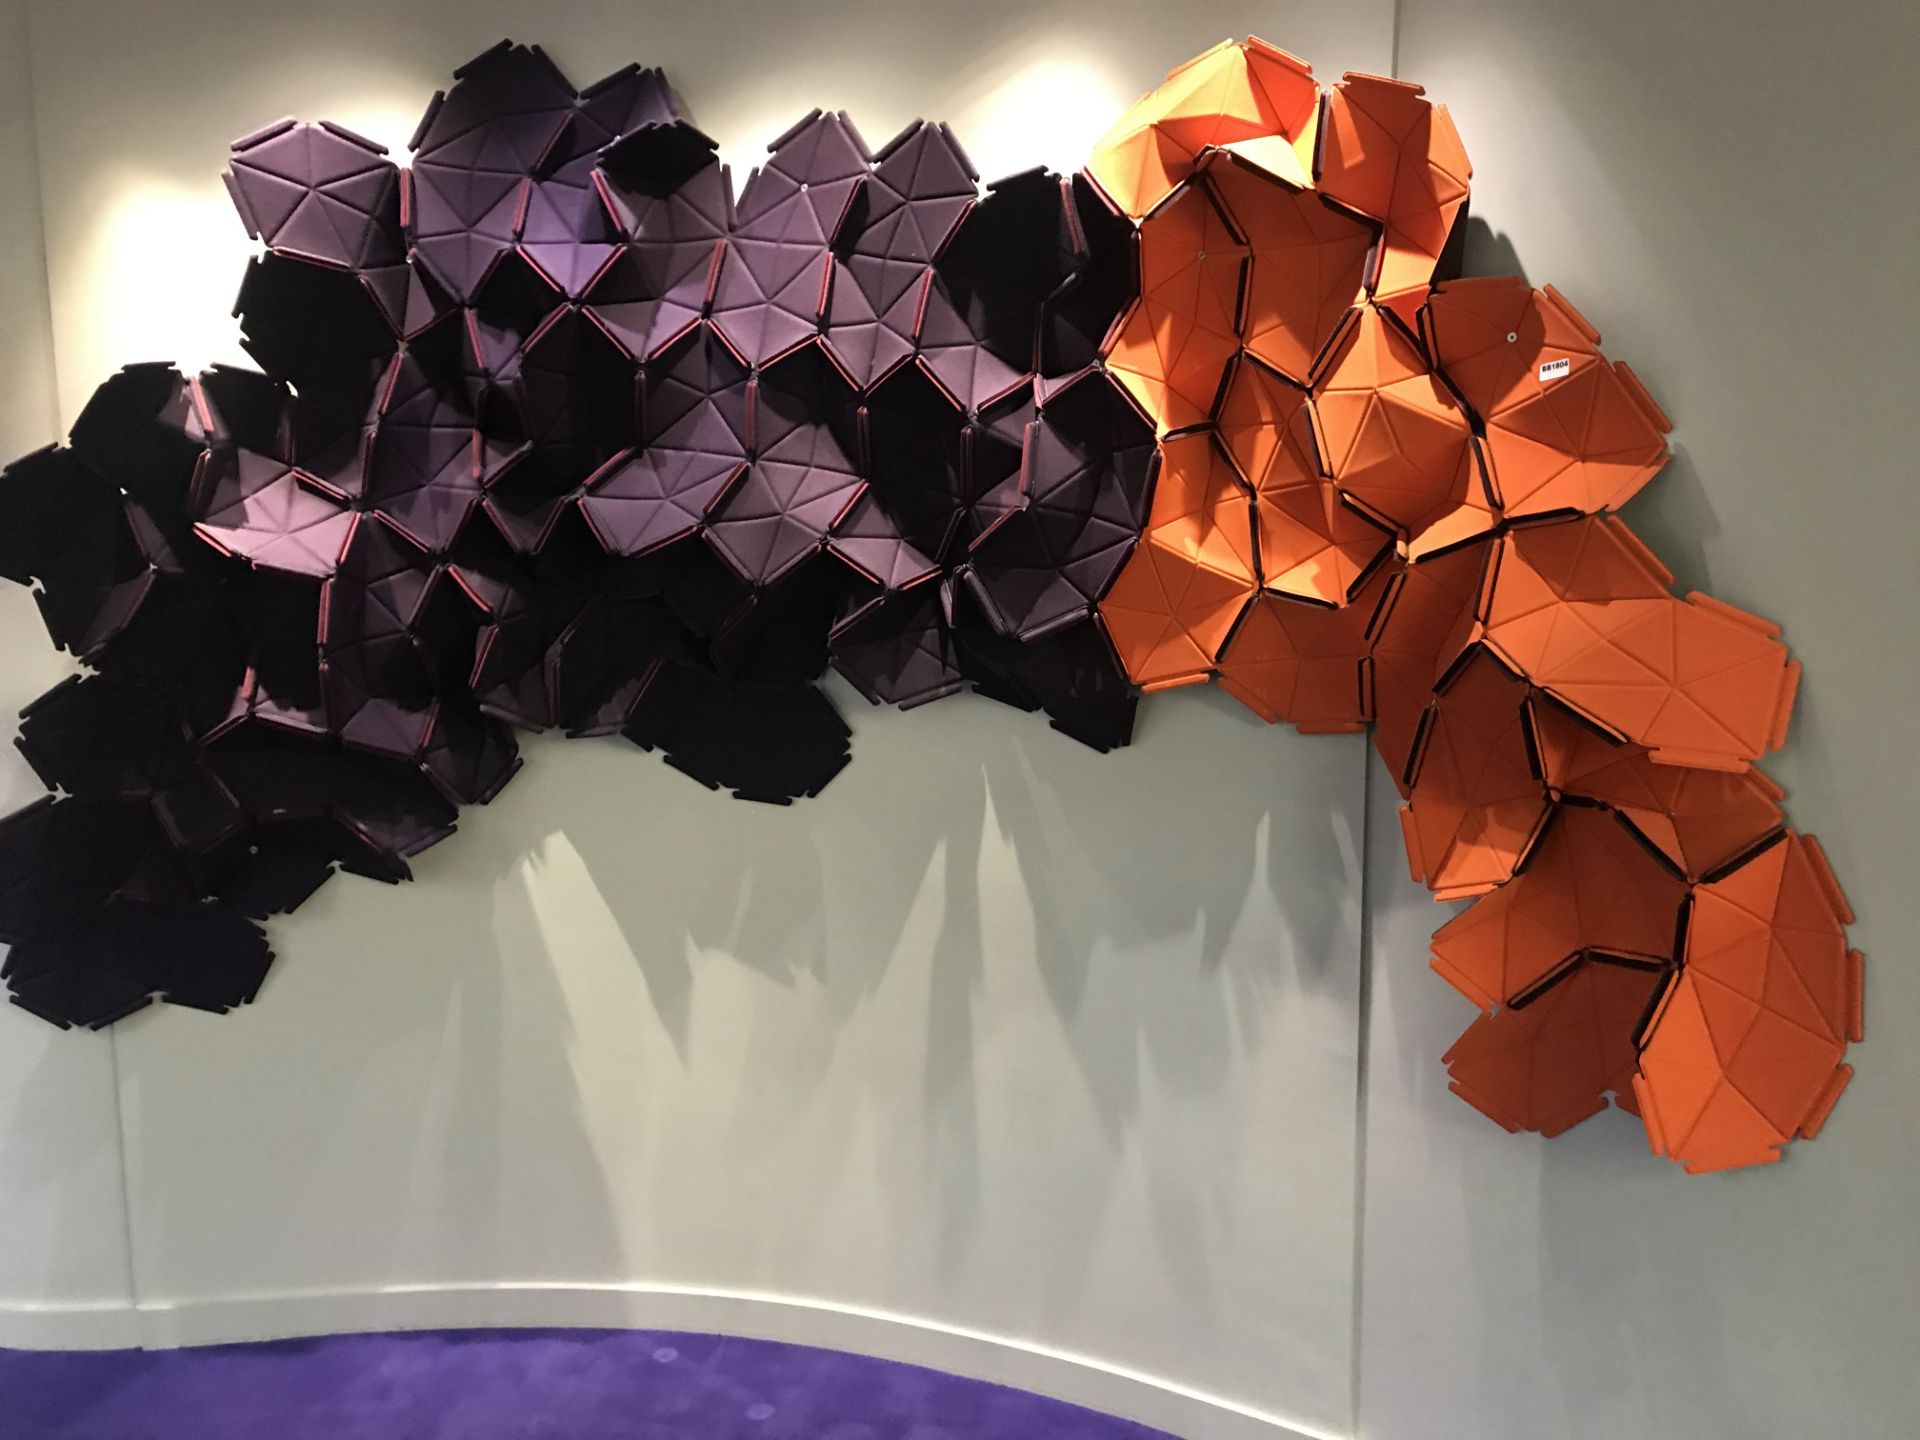 1 x Kvadrat Cloud Three-Dimensional Contemporary Wall Art - 100% Wool - Designed By Ronan and - Image 6 of 7